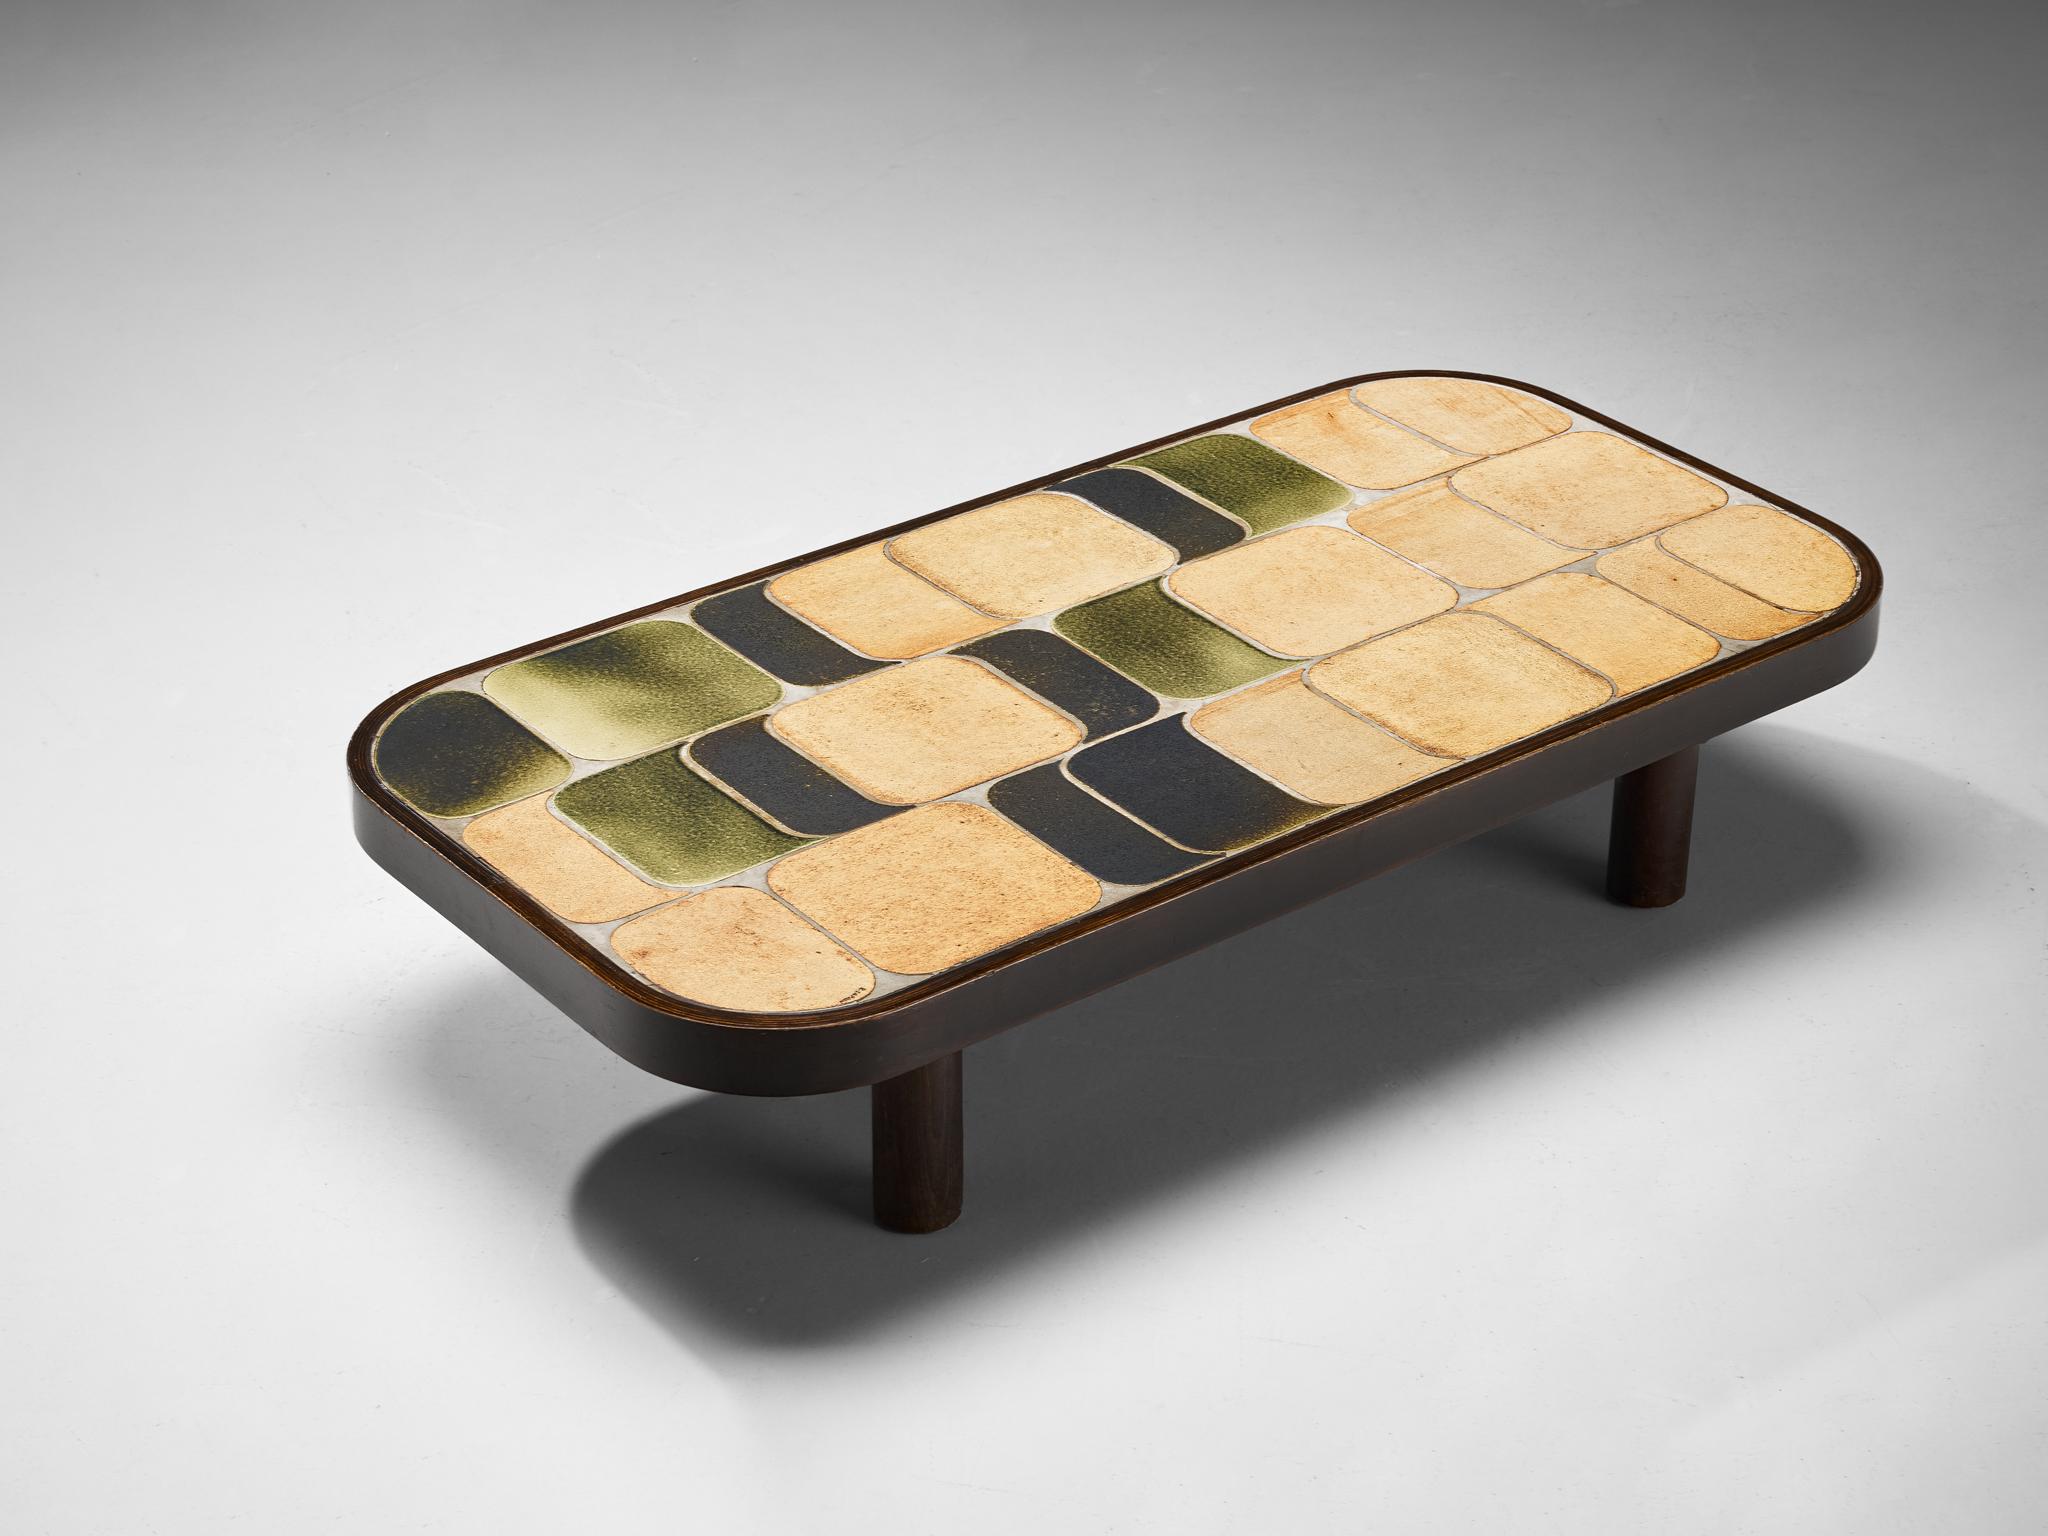 Roger Capron, coffee table, ceramic, stained beech, France, 1960s

Lovely French coffee table with wonderful composed ceramic tiles by French designer Roger Capron. Both the tiles as well as the frame feature rounded corners. The tiles have